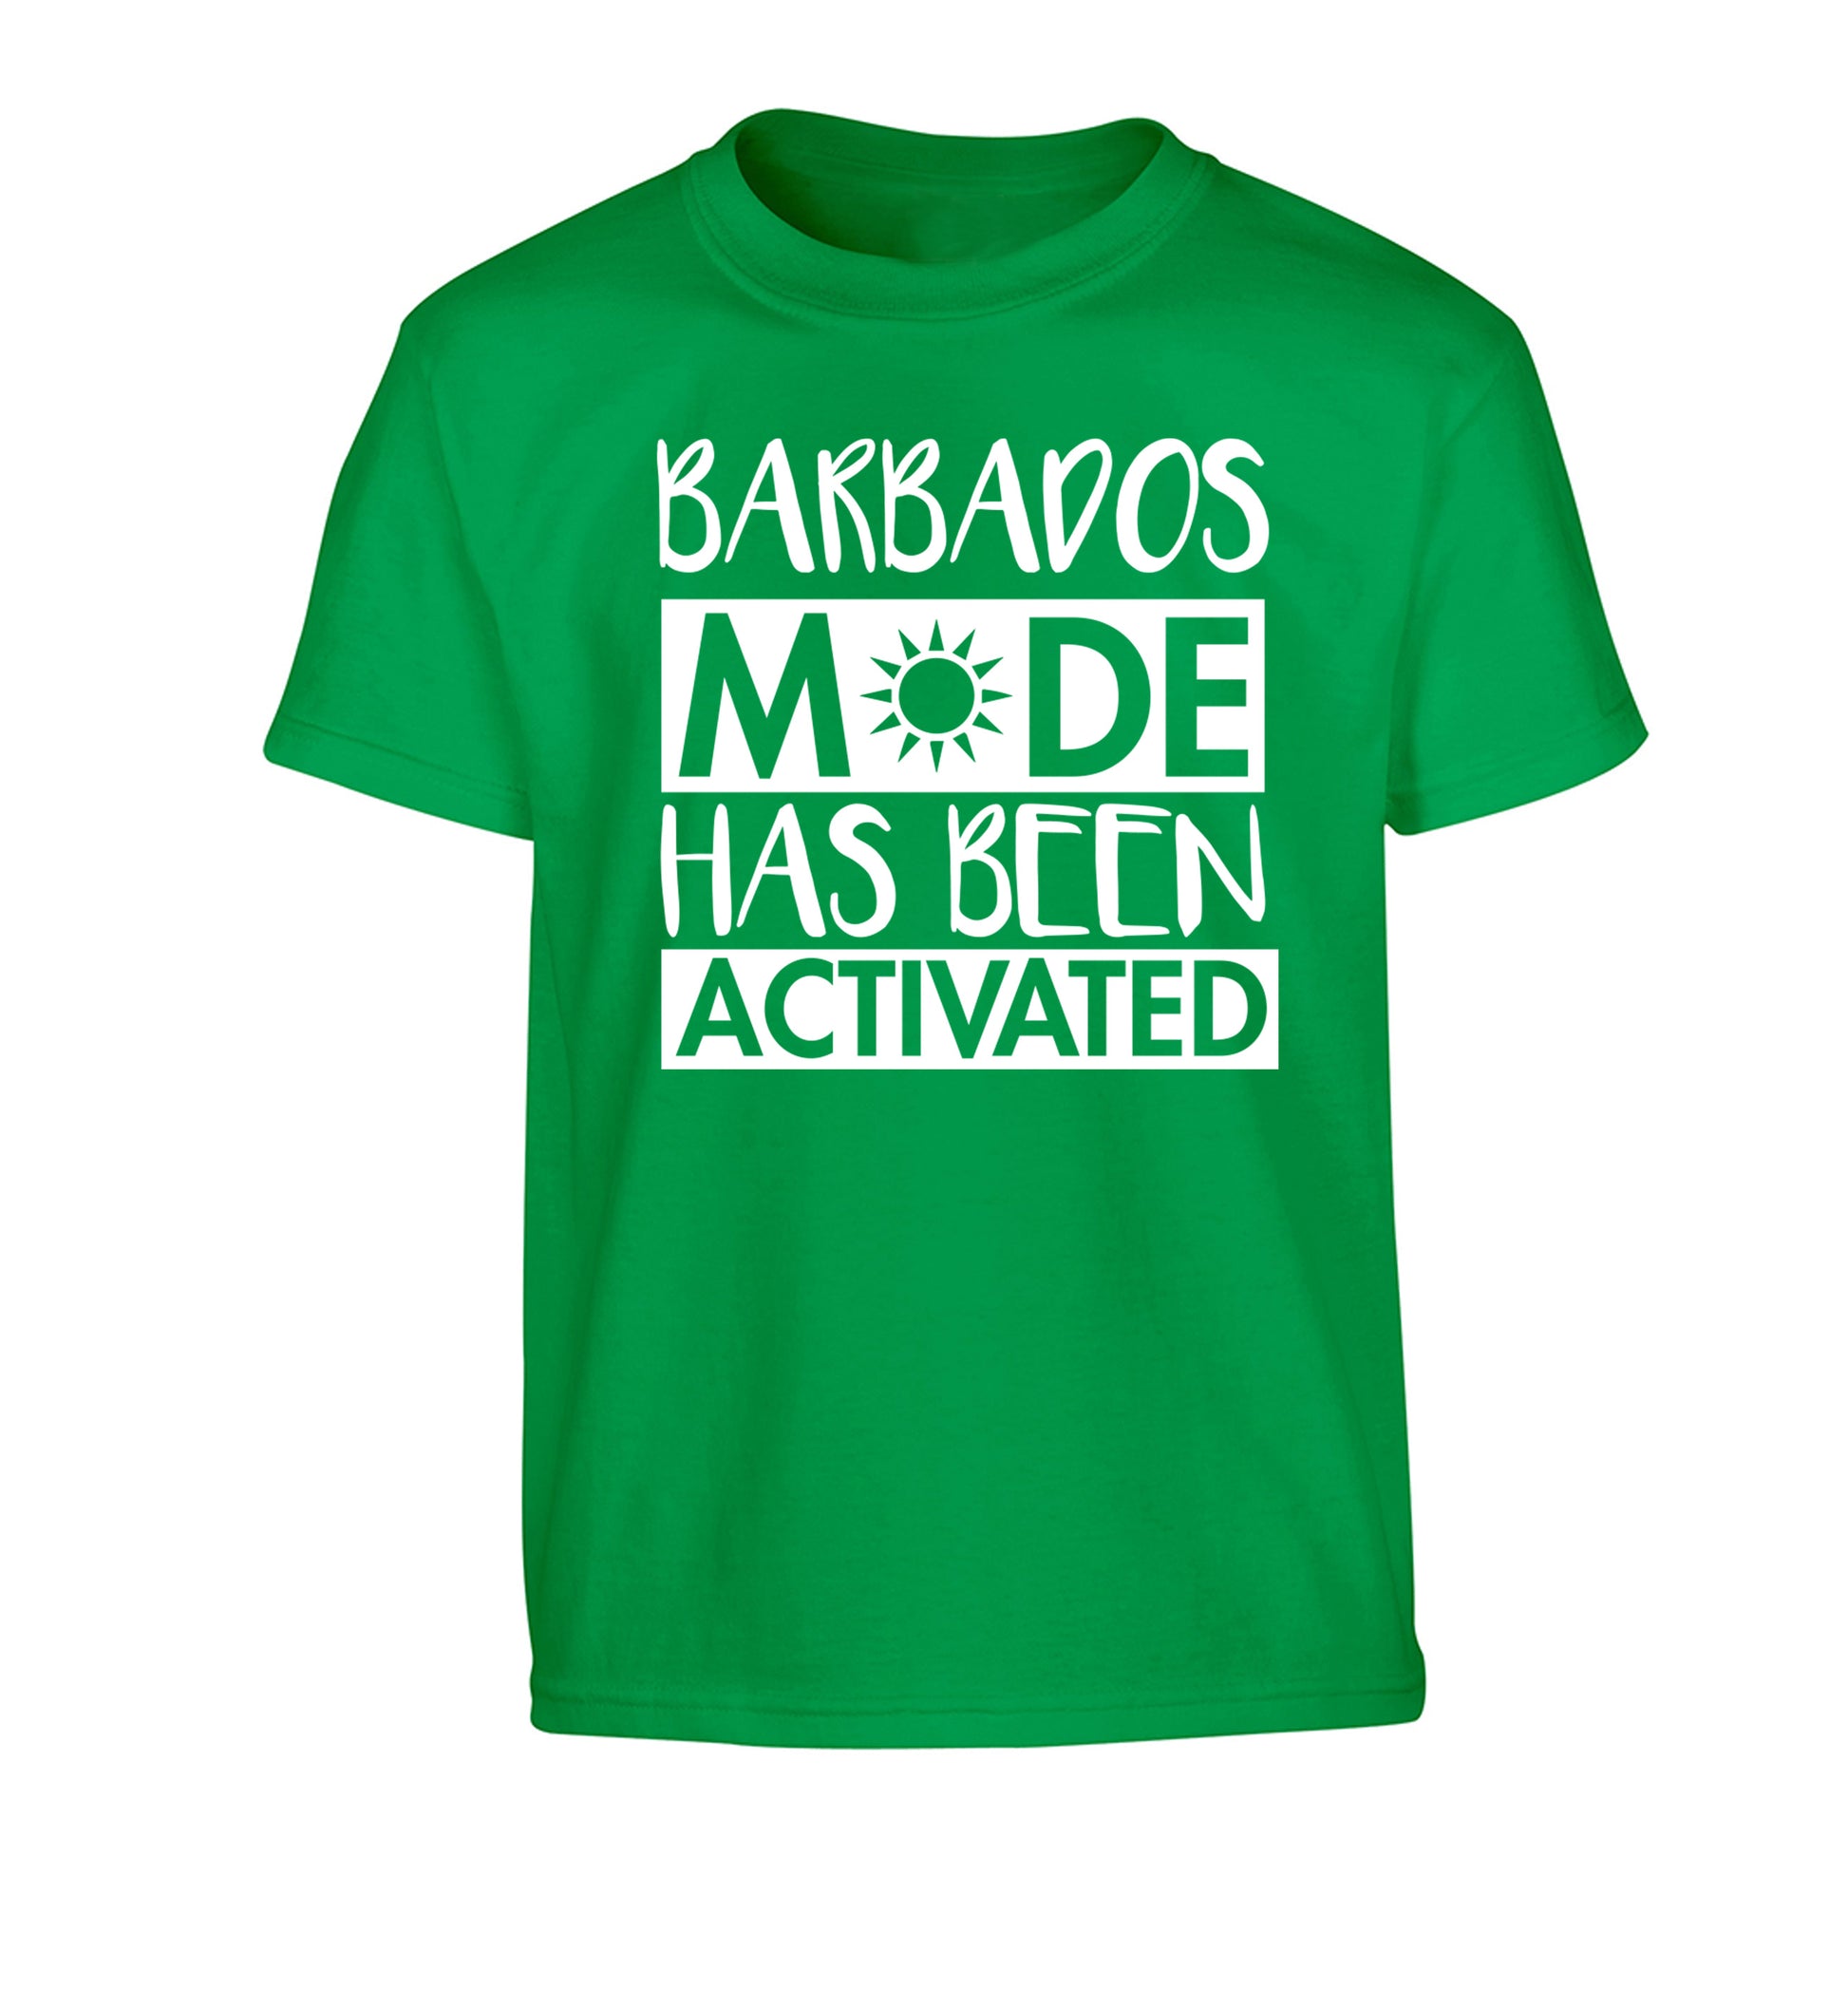 Barbados mode has been activated Children's green Tshirt 12-13 Years